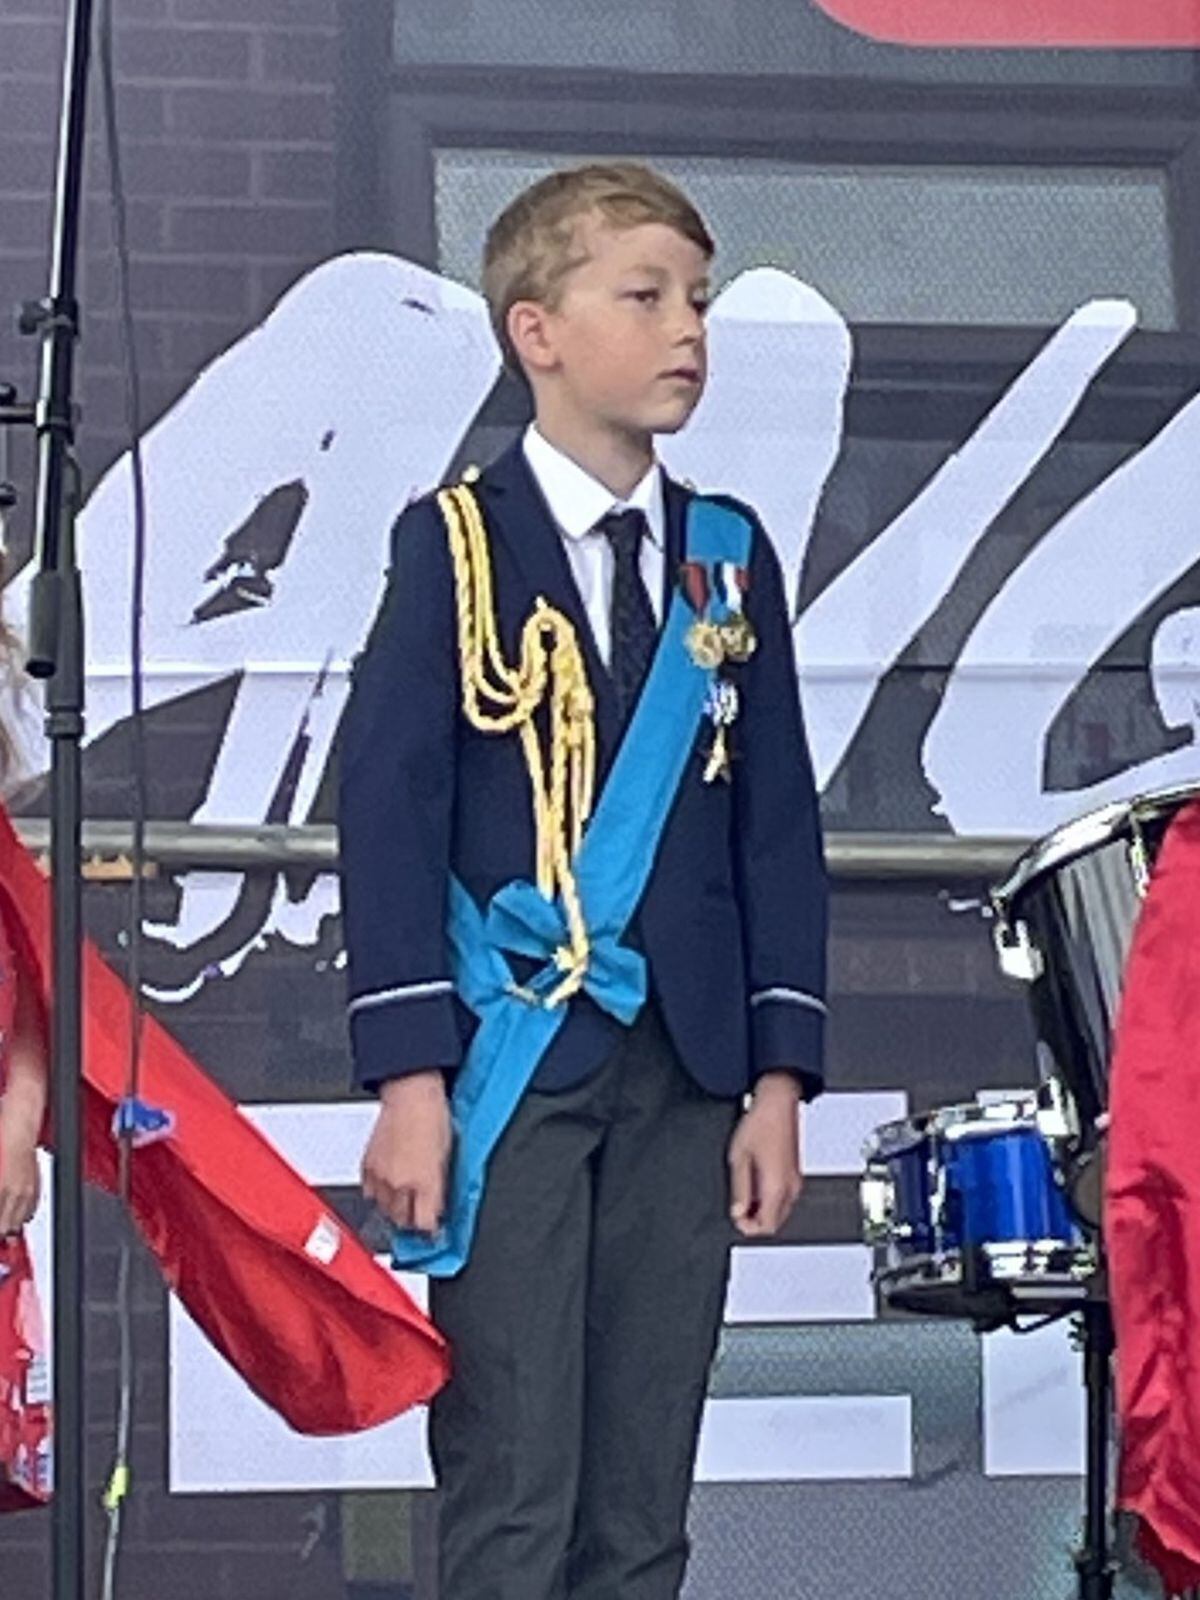 Joshua Garland, age 8, who took party in Wombourne Parish Council's concert on Friday. He dressed up and took to the stage as Prince William.